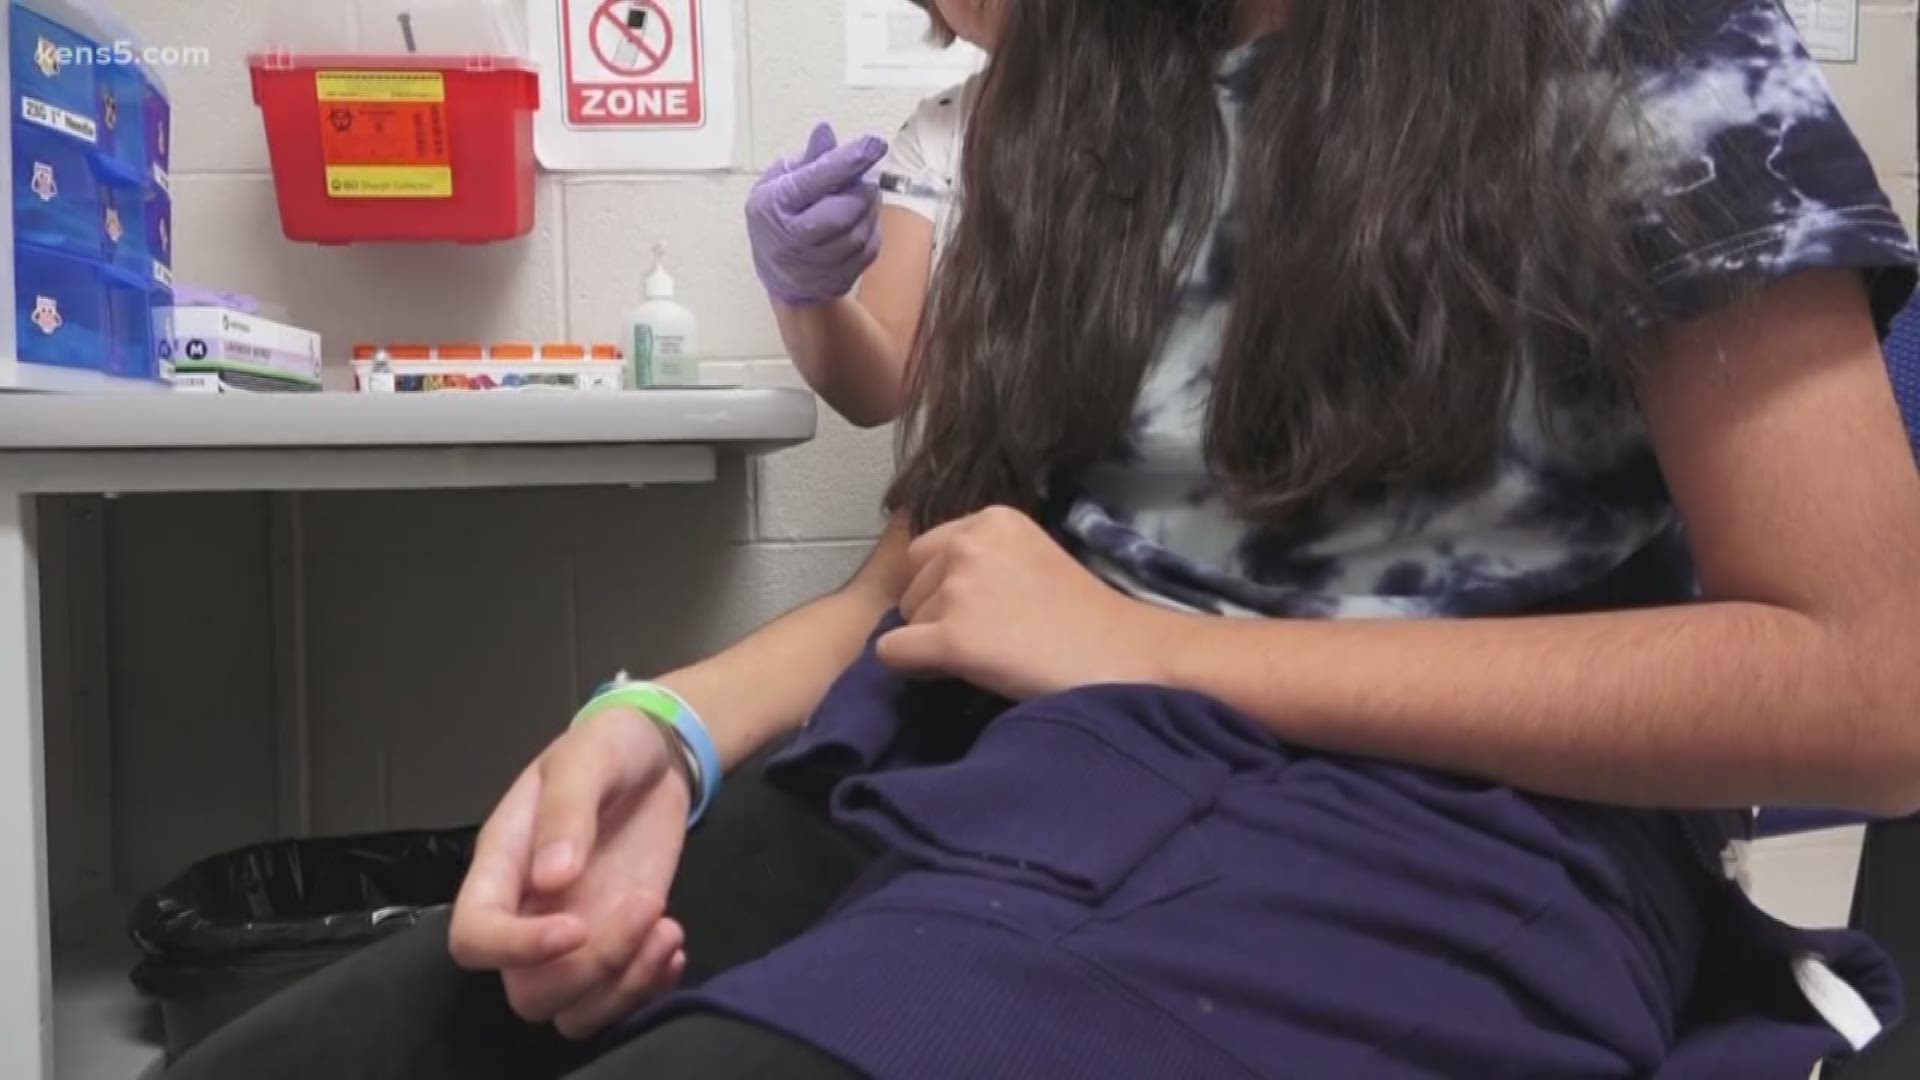 San Antonio Metro Health officials say it isn't too late to get vaccinated.